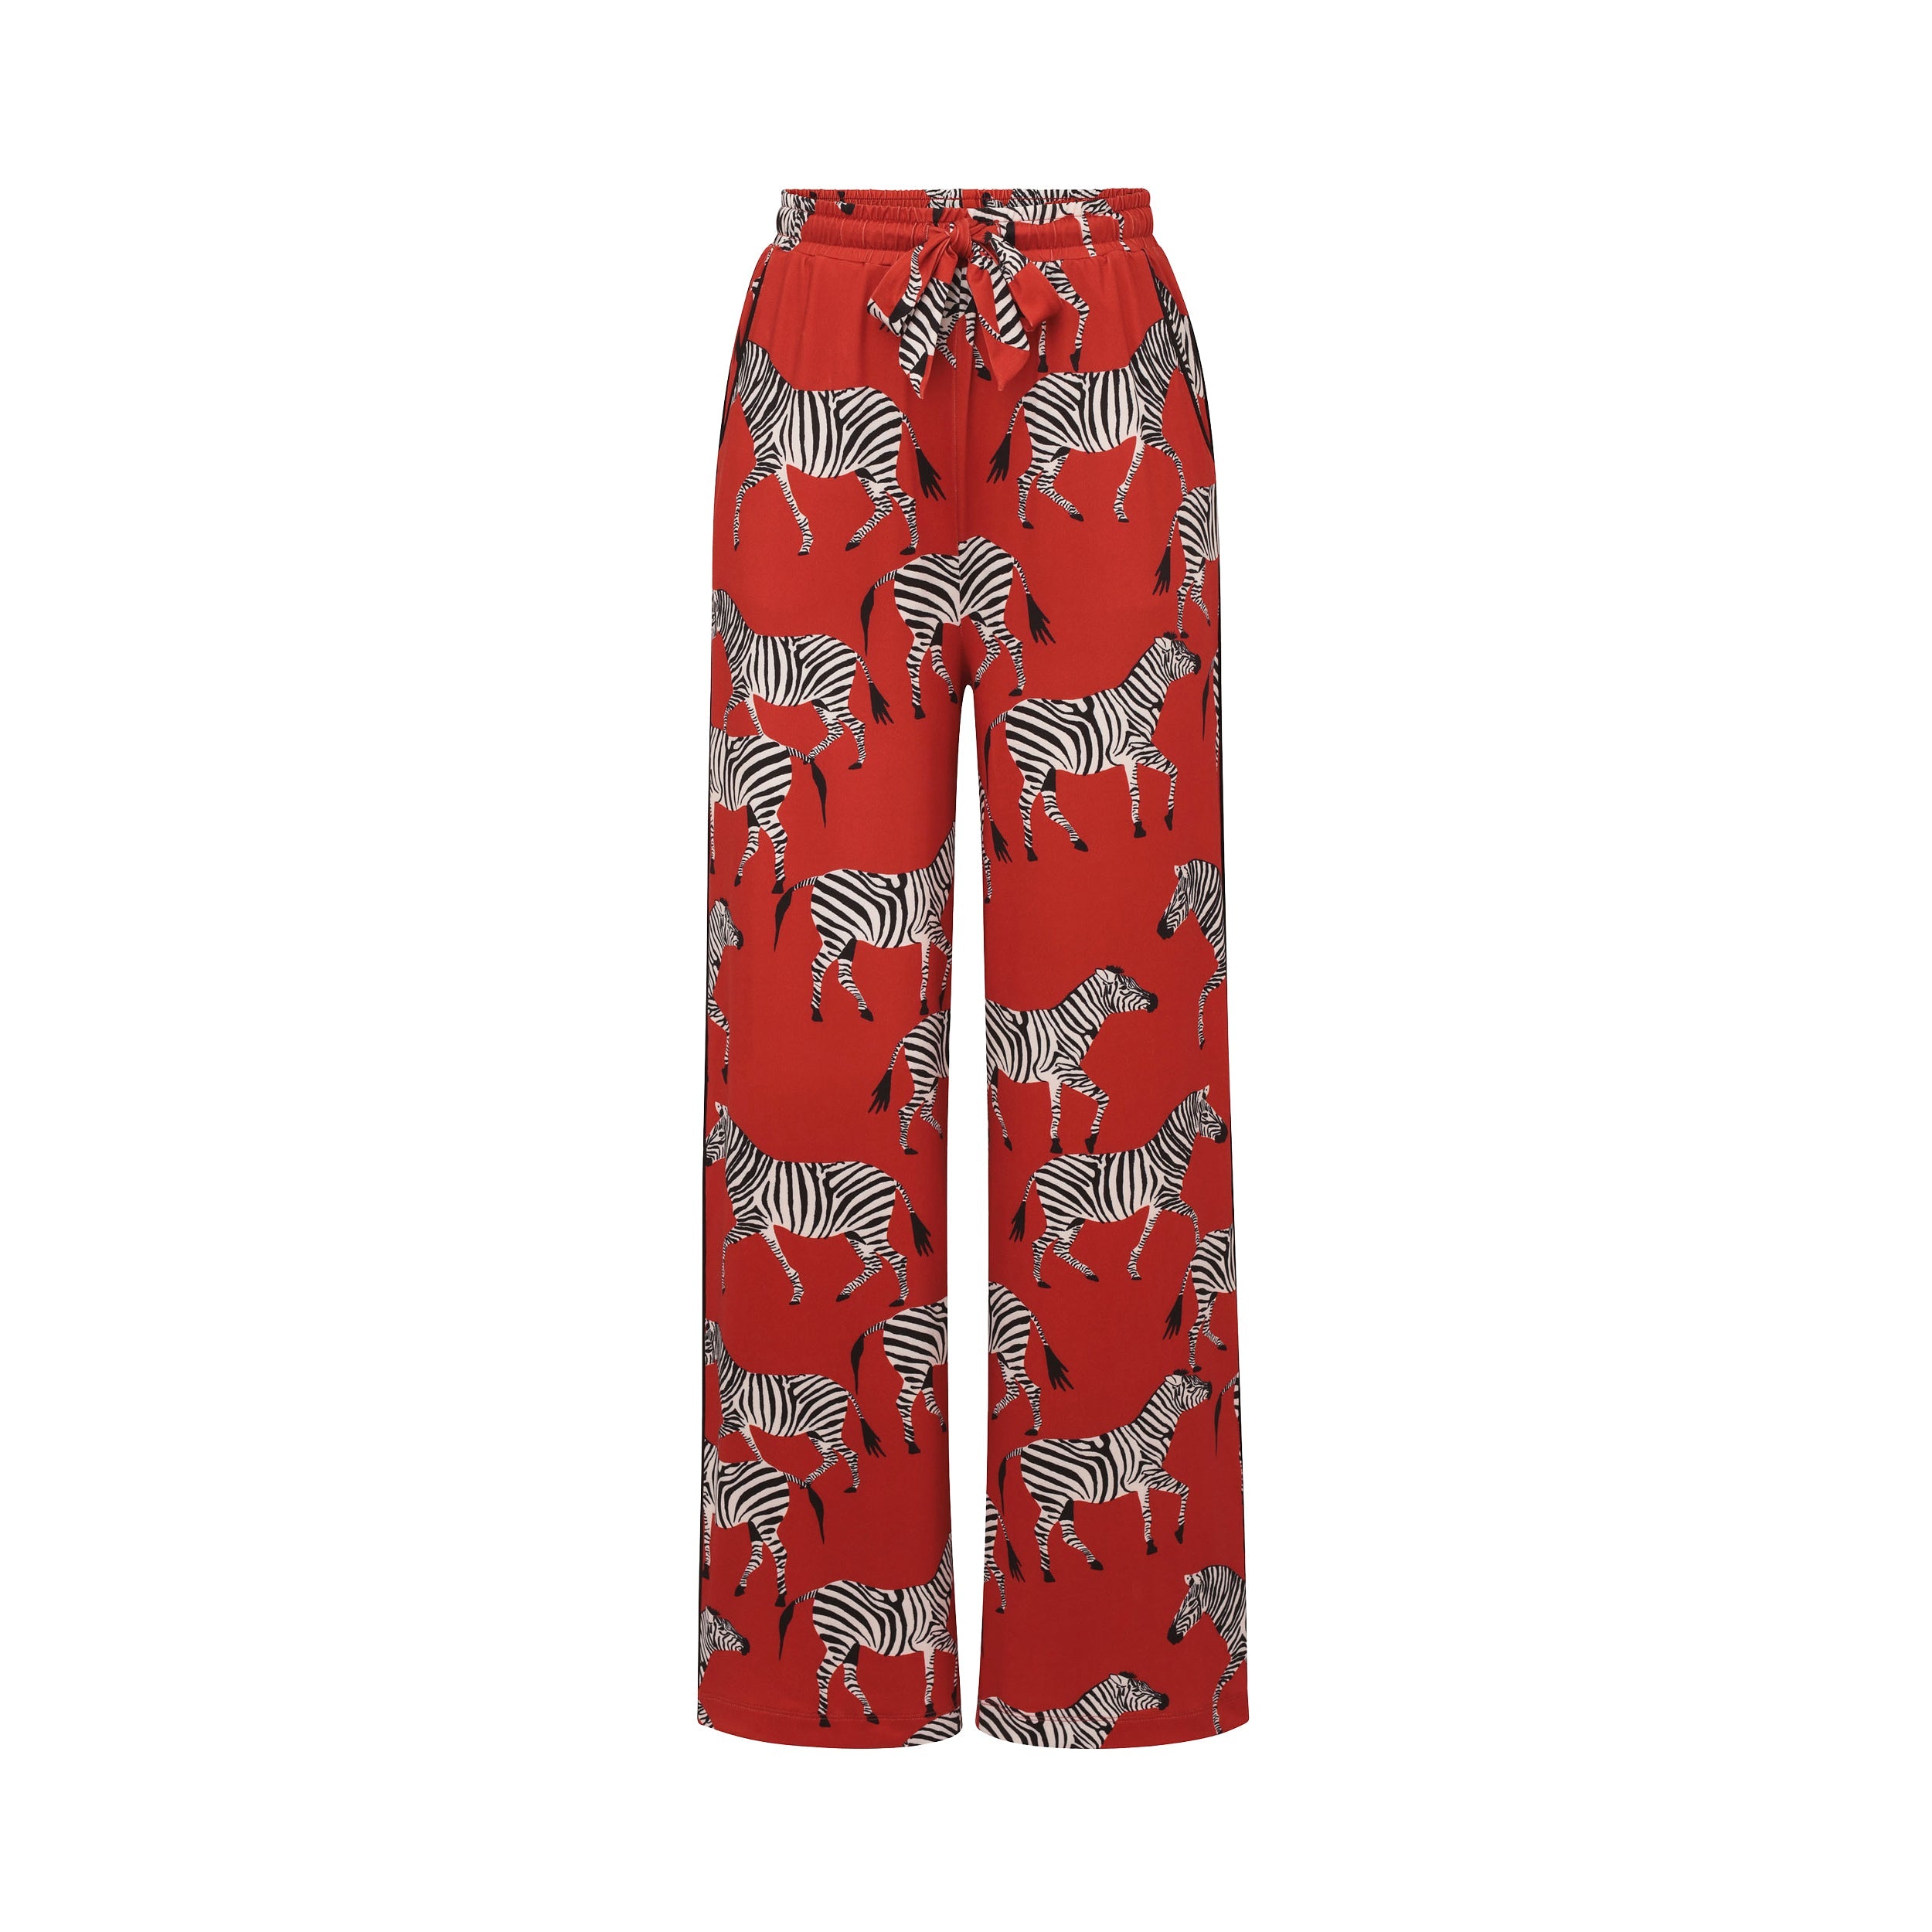 Product view of breathable, relaxed and buttery smooth pajama pant featuring high-waist cut, side pockets, front tie and stunning Zebra print.